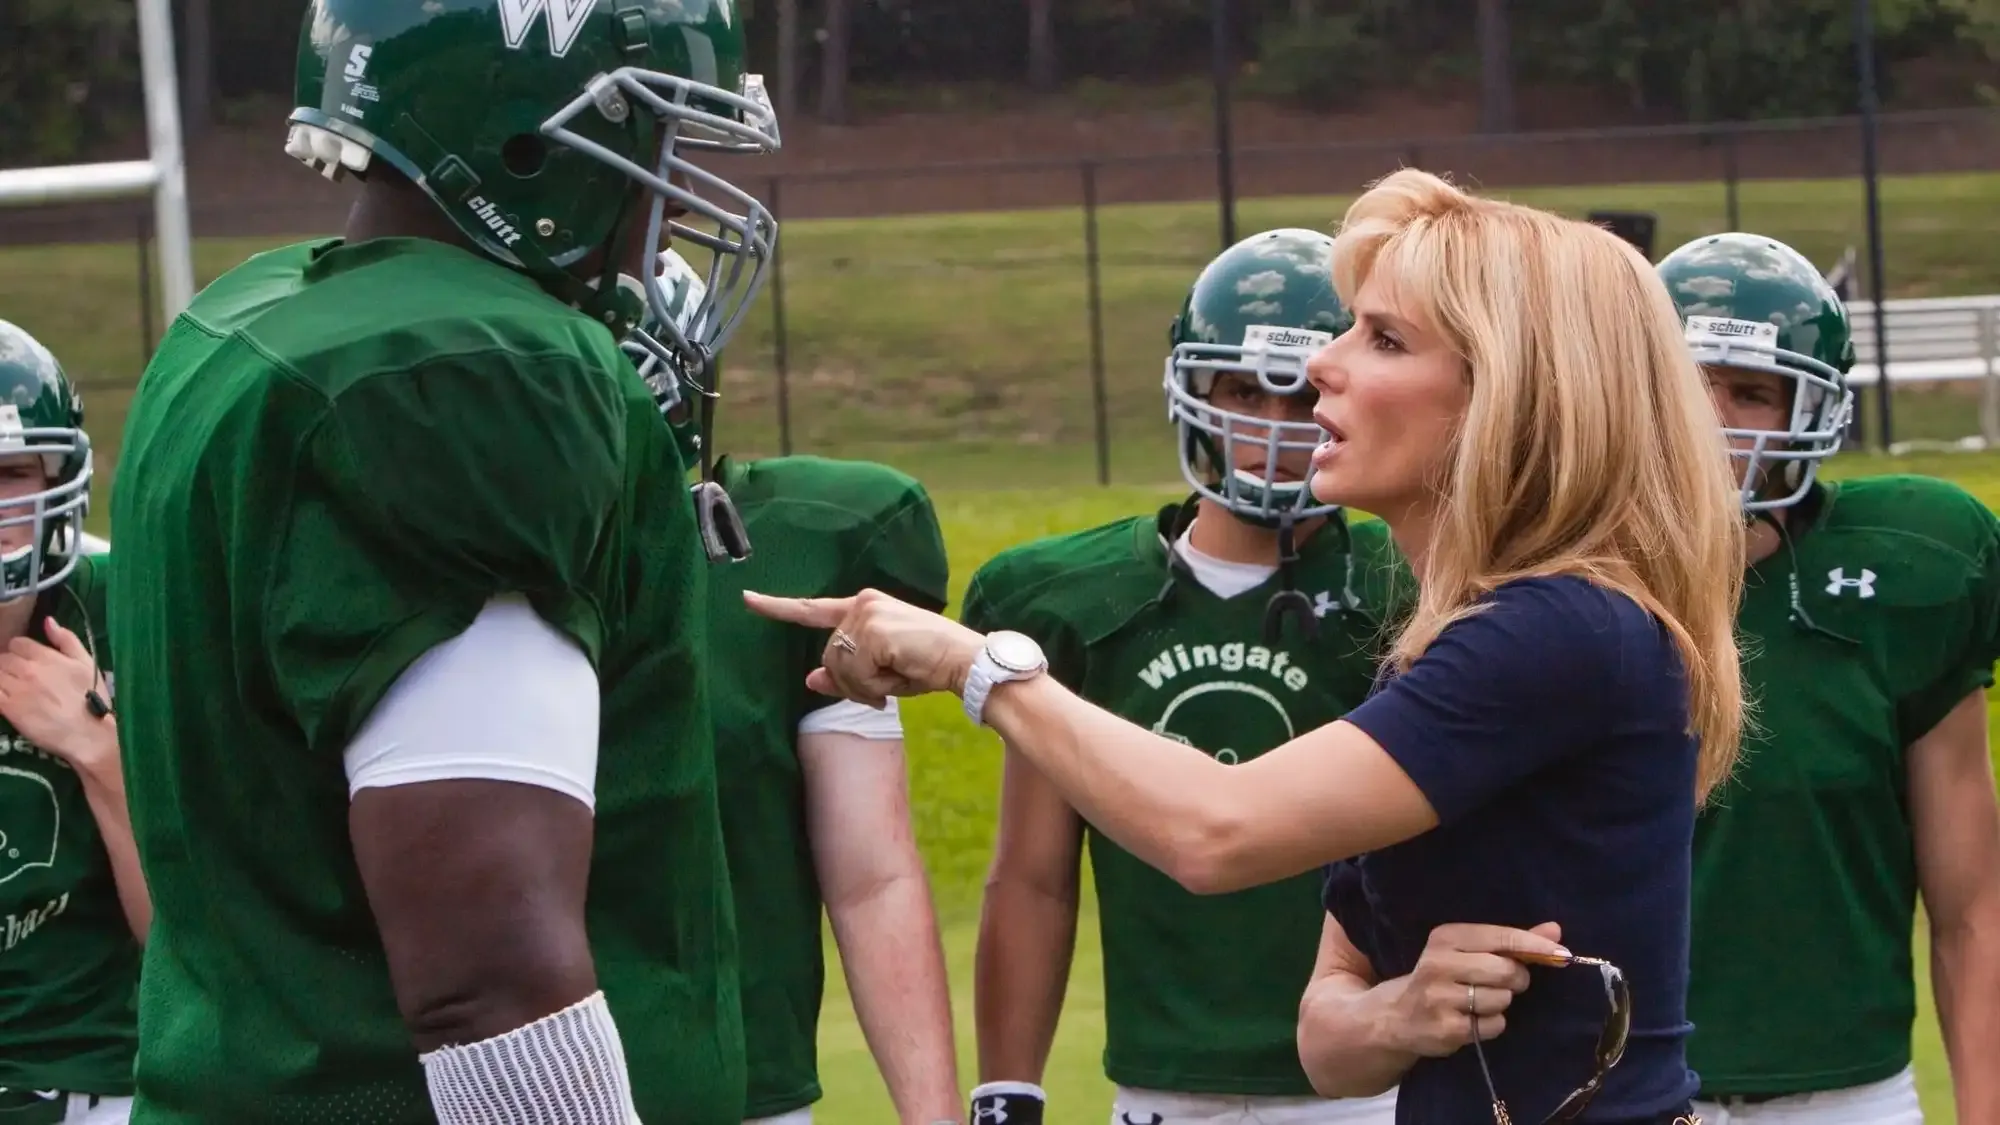 The Blind Side movie review